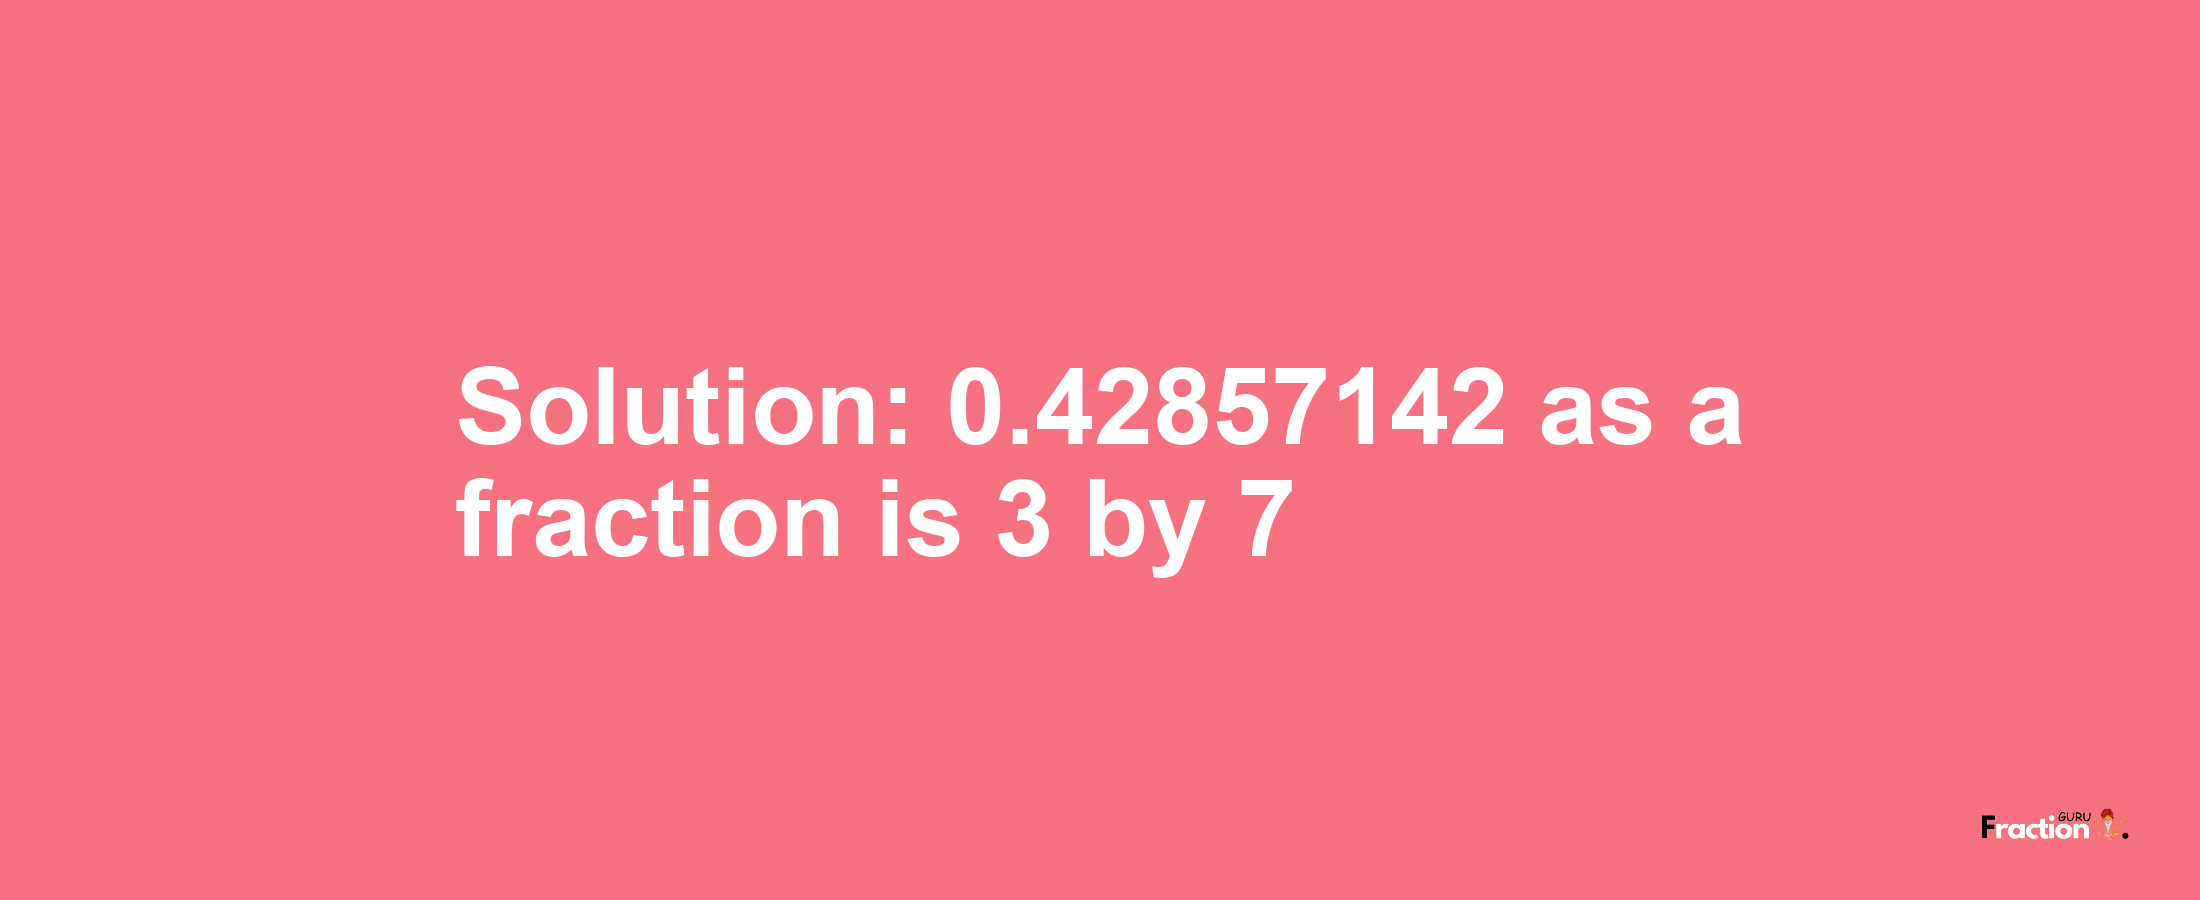 Solution:0.42857142 as a fraction is 3/7